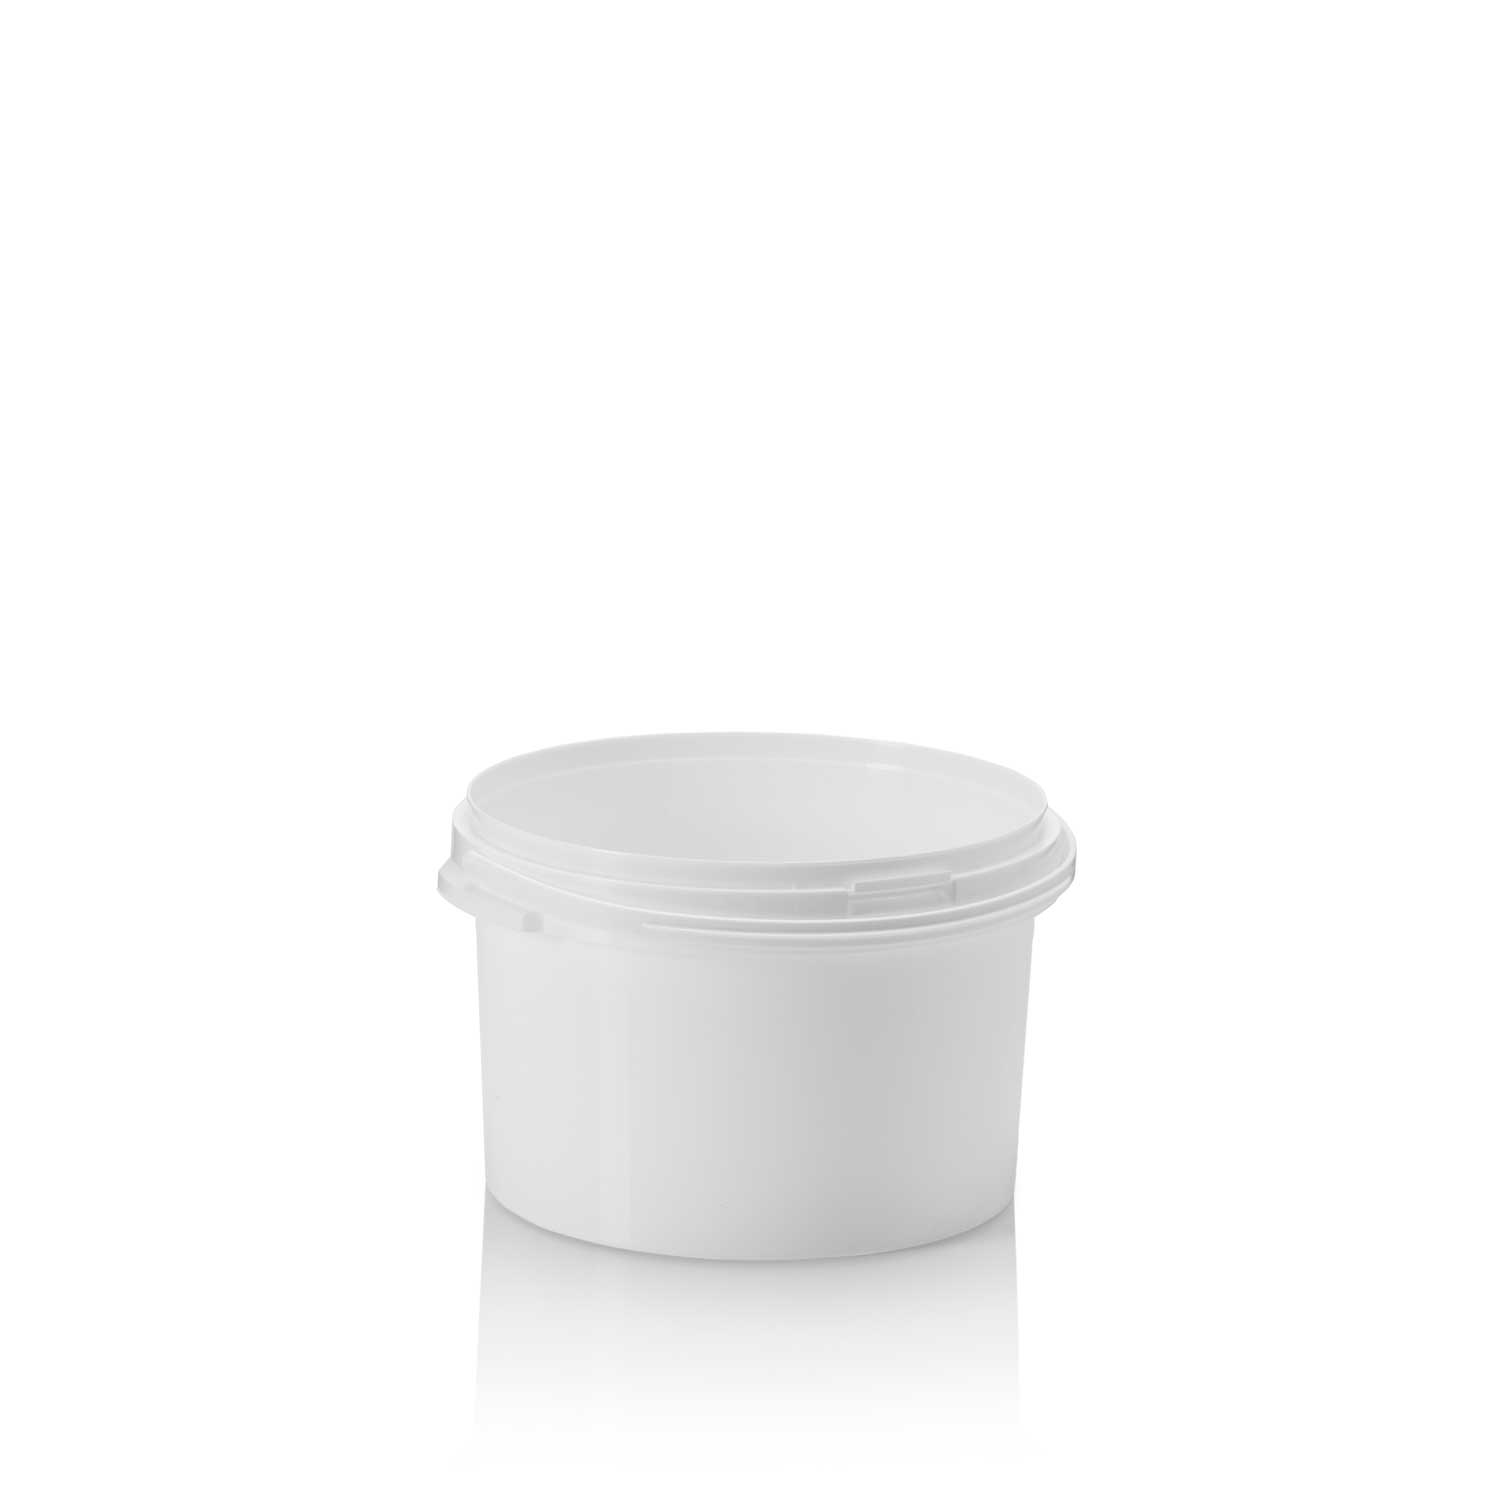 5ltr White PP Tamper Evident Pail with Plastic Handle